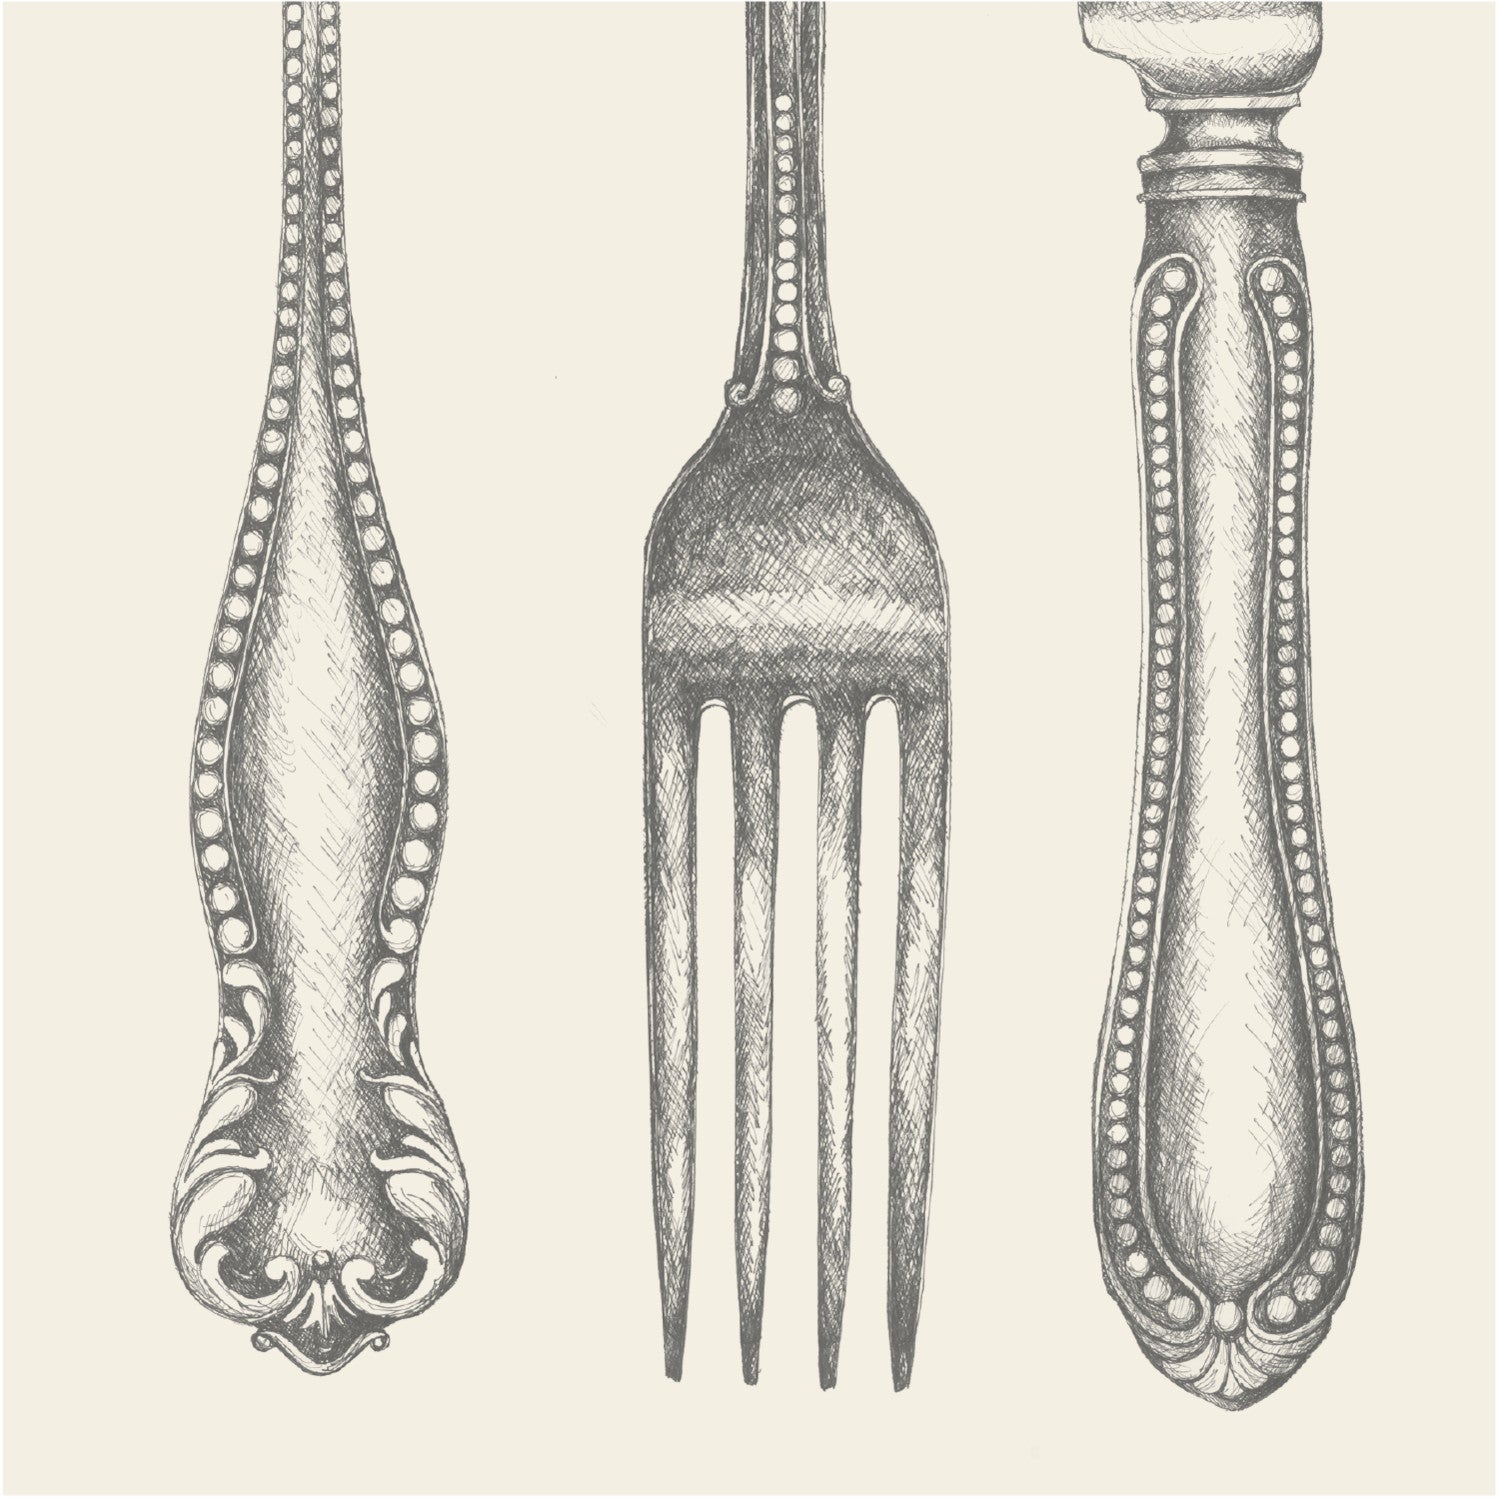 A Classic Cutlery Napkins table setting featuring a drawing of a fork, knife, and spoon alongside napkins, perfect for a party. (Brand Name: Hester &amp; Cook)